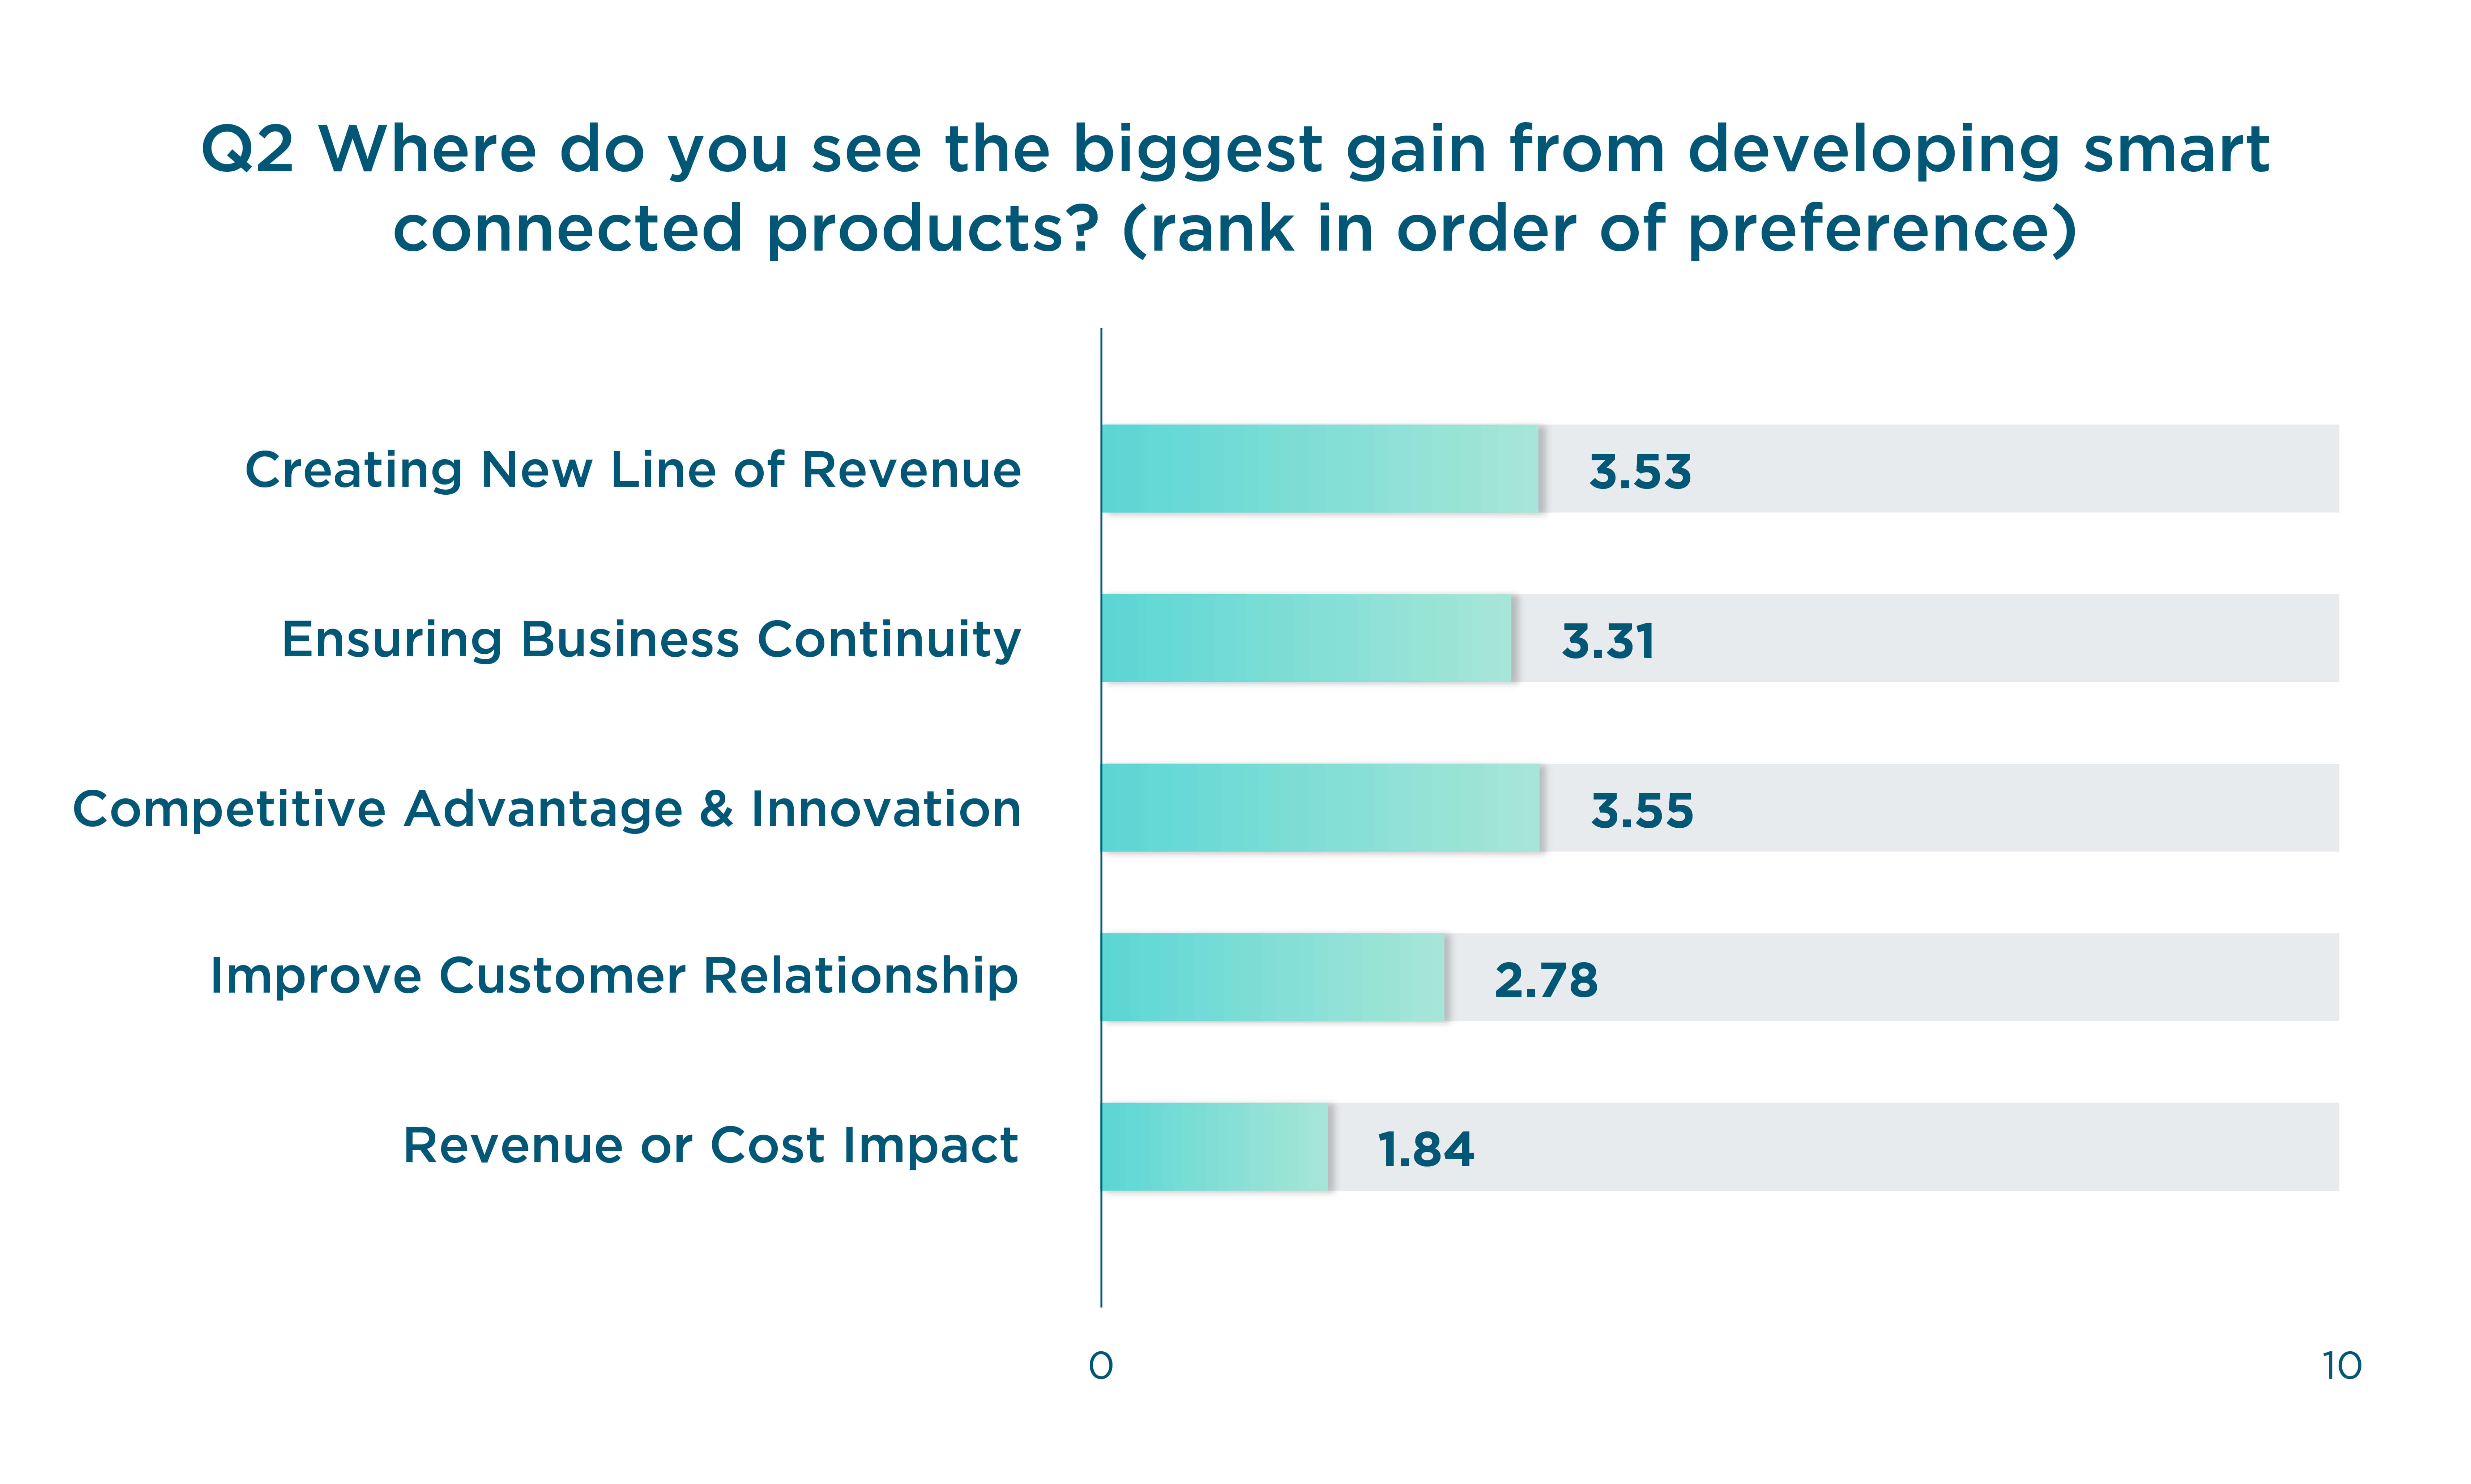 What respondents thought their biggest gain would be in developing smart connected products